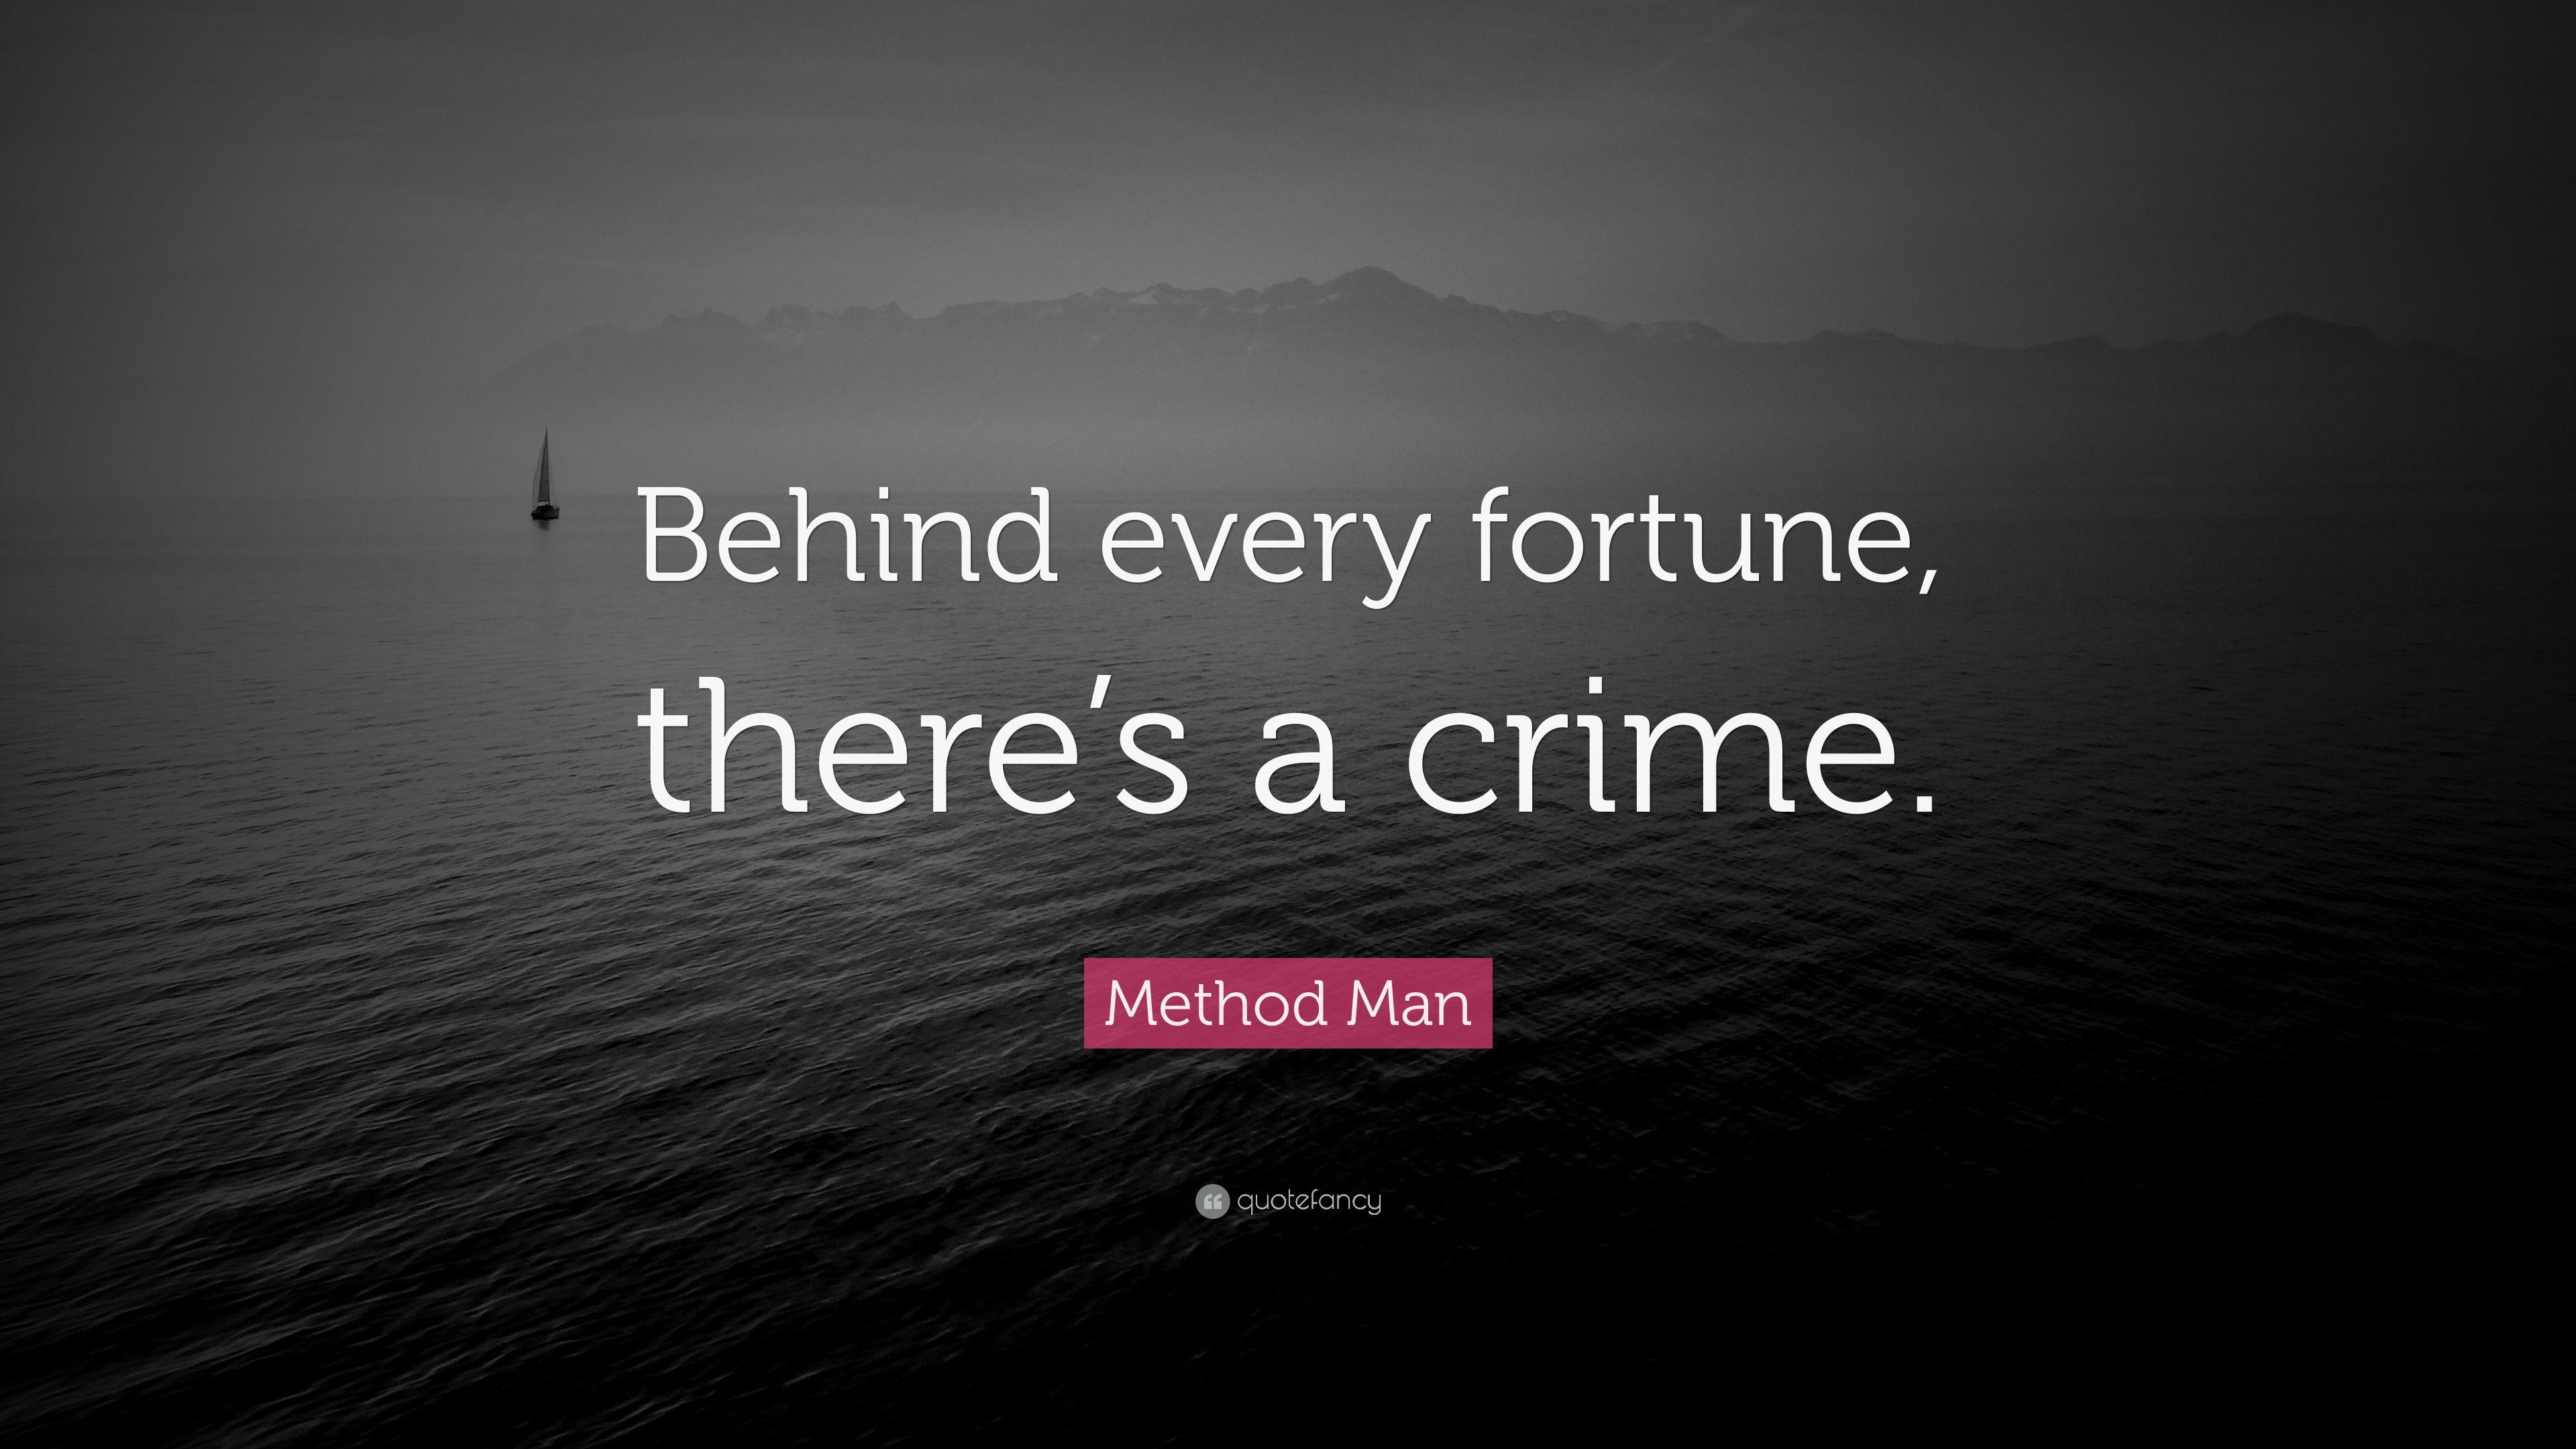 Method Man Quote: “Behind every fortune, there's a crime.” 7